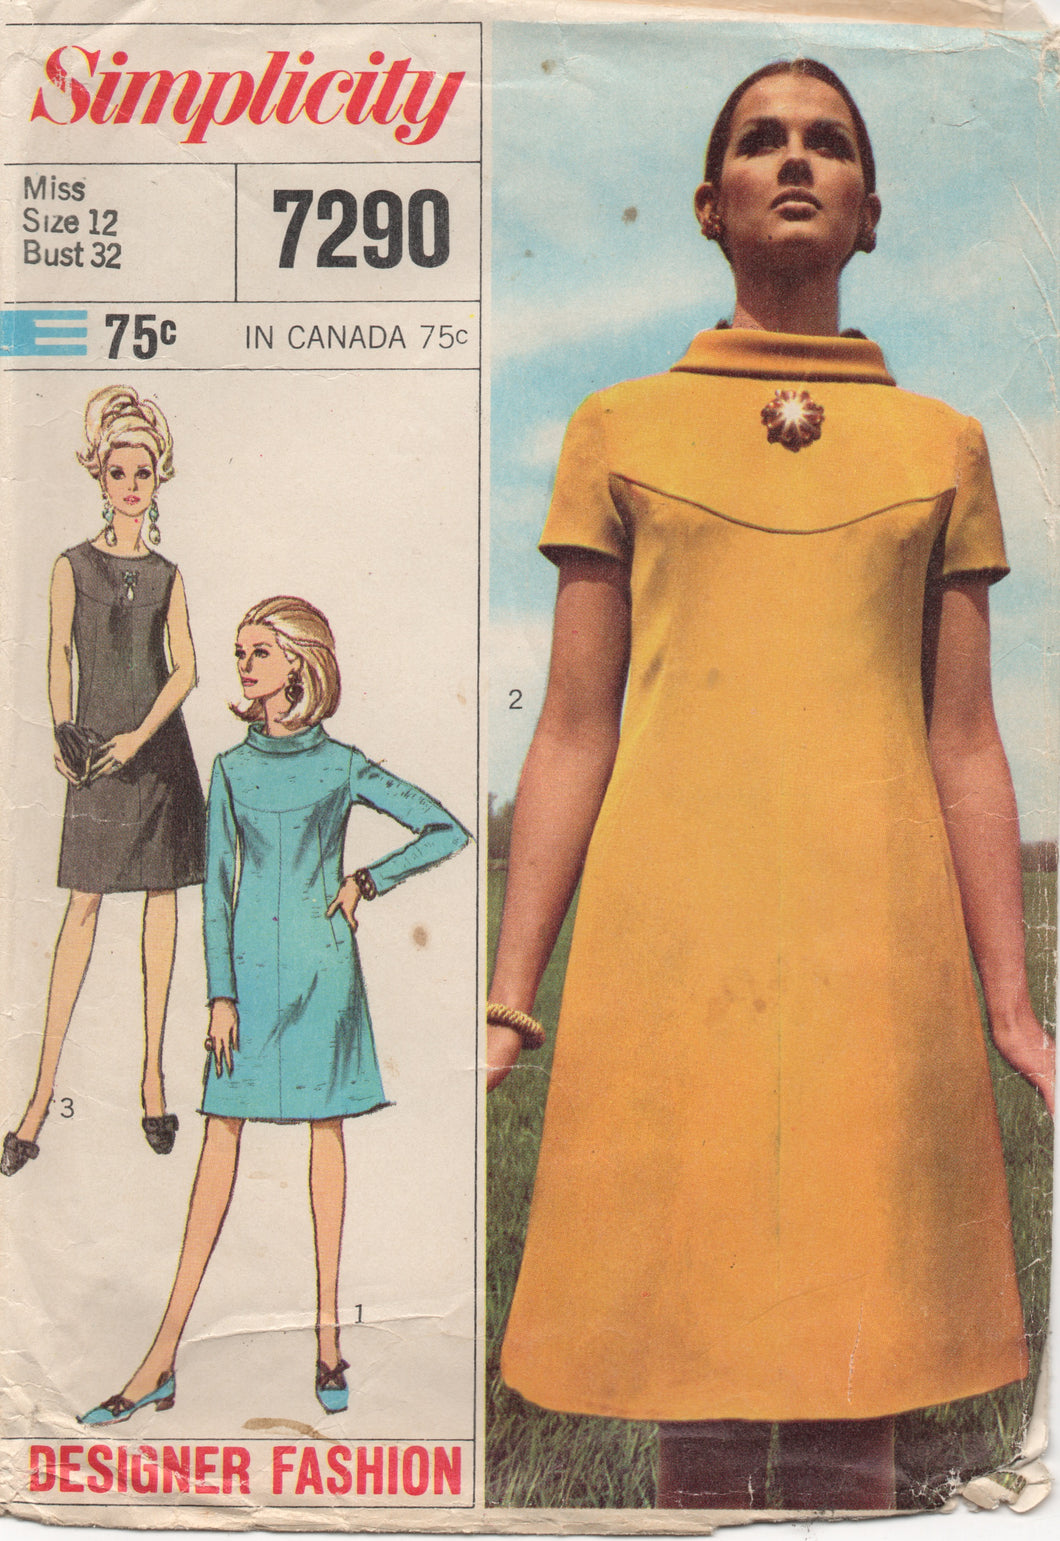 1960's Simplicity Designer One Piece Dress with Rolled Collar Pattern - Bust 32